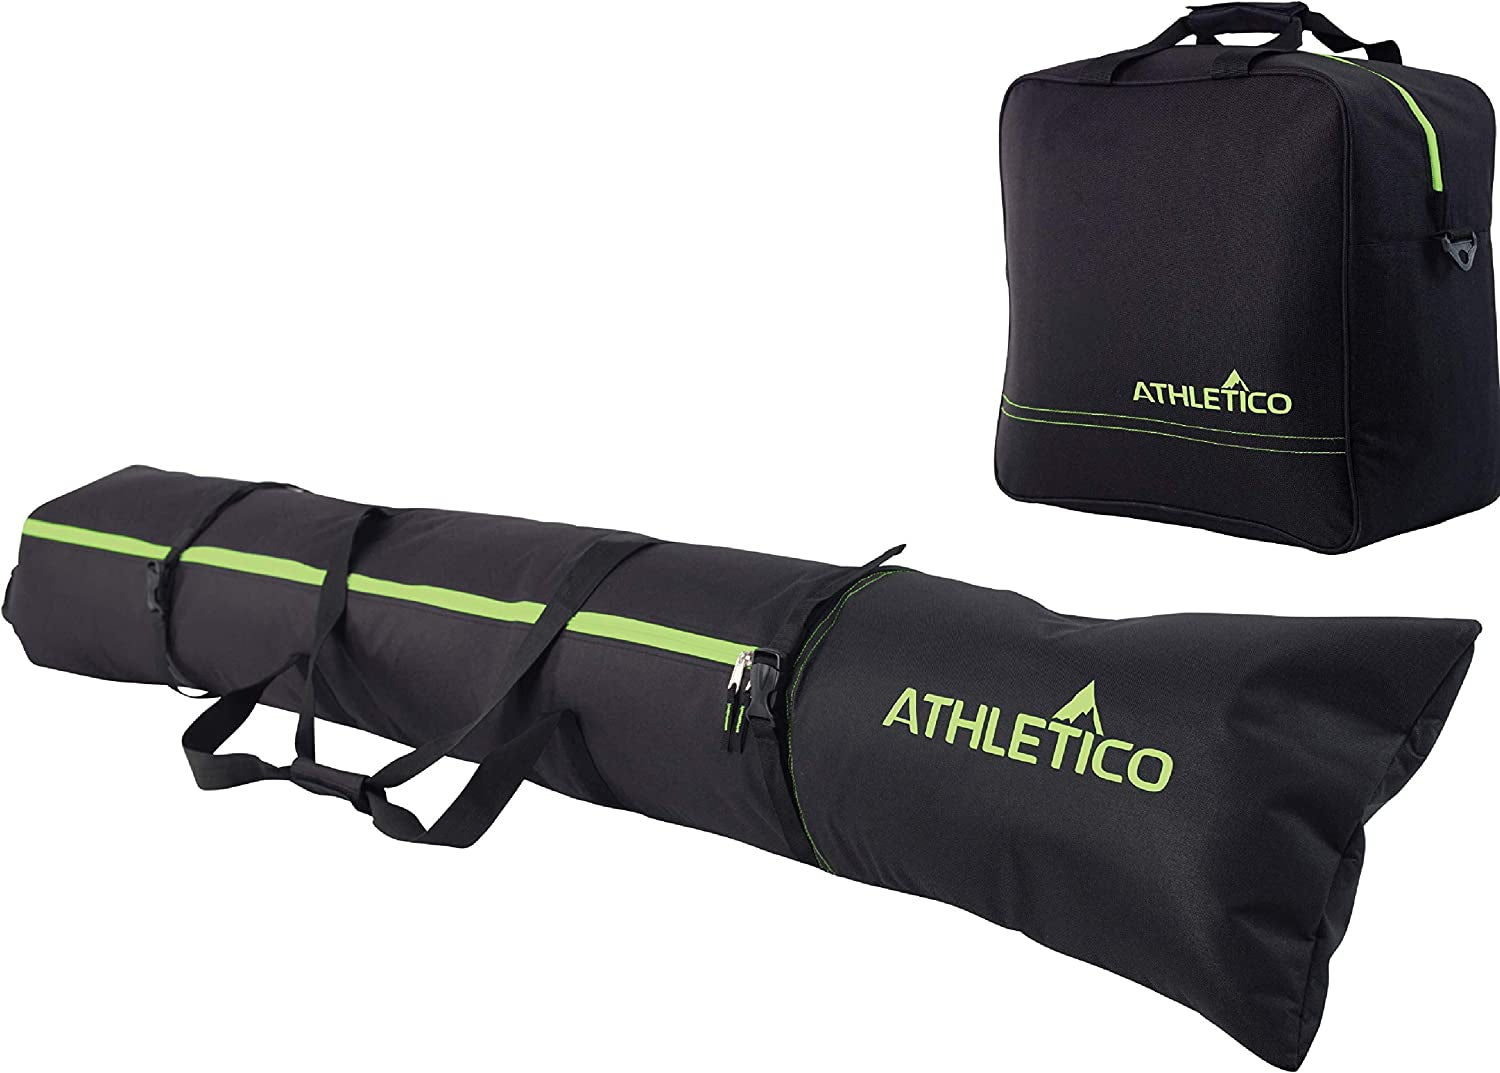 Athletico Padded Two-Piece Ski and Boot Bag Combo | Store & Transport Skis up to 200 Cm and Boots up to Size 13 | Includes 1 Padded Ski Bag & 1 Padded Ski Boot Bag